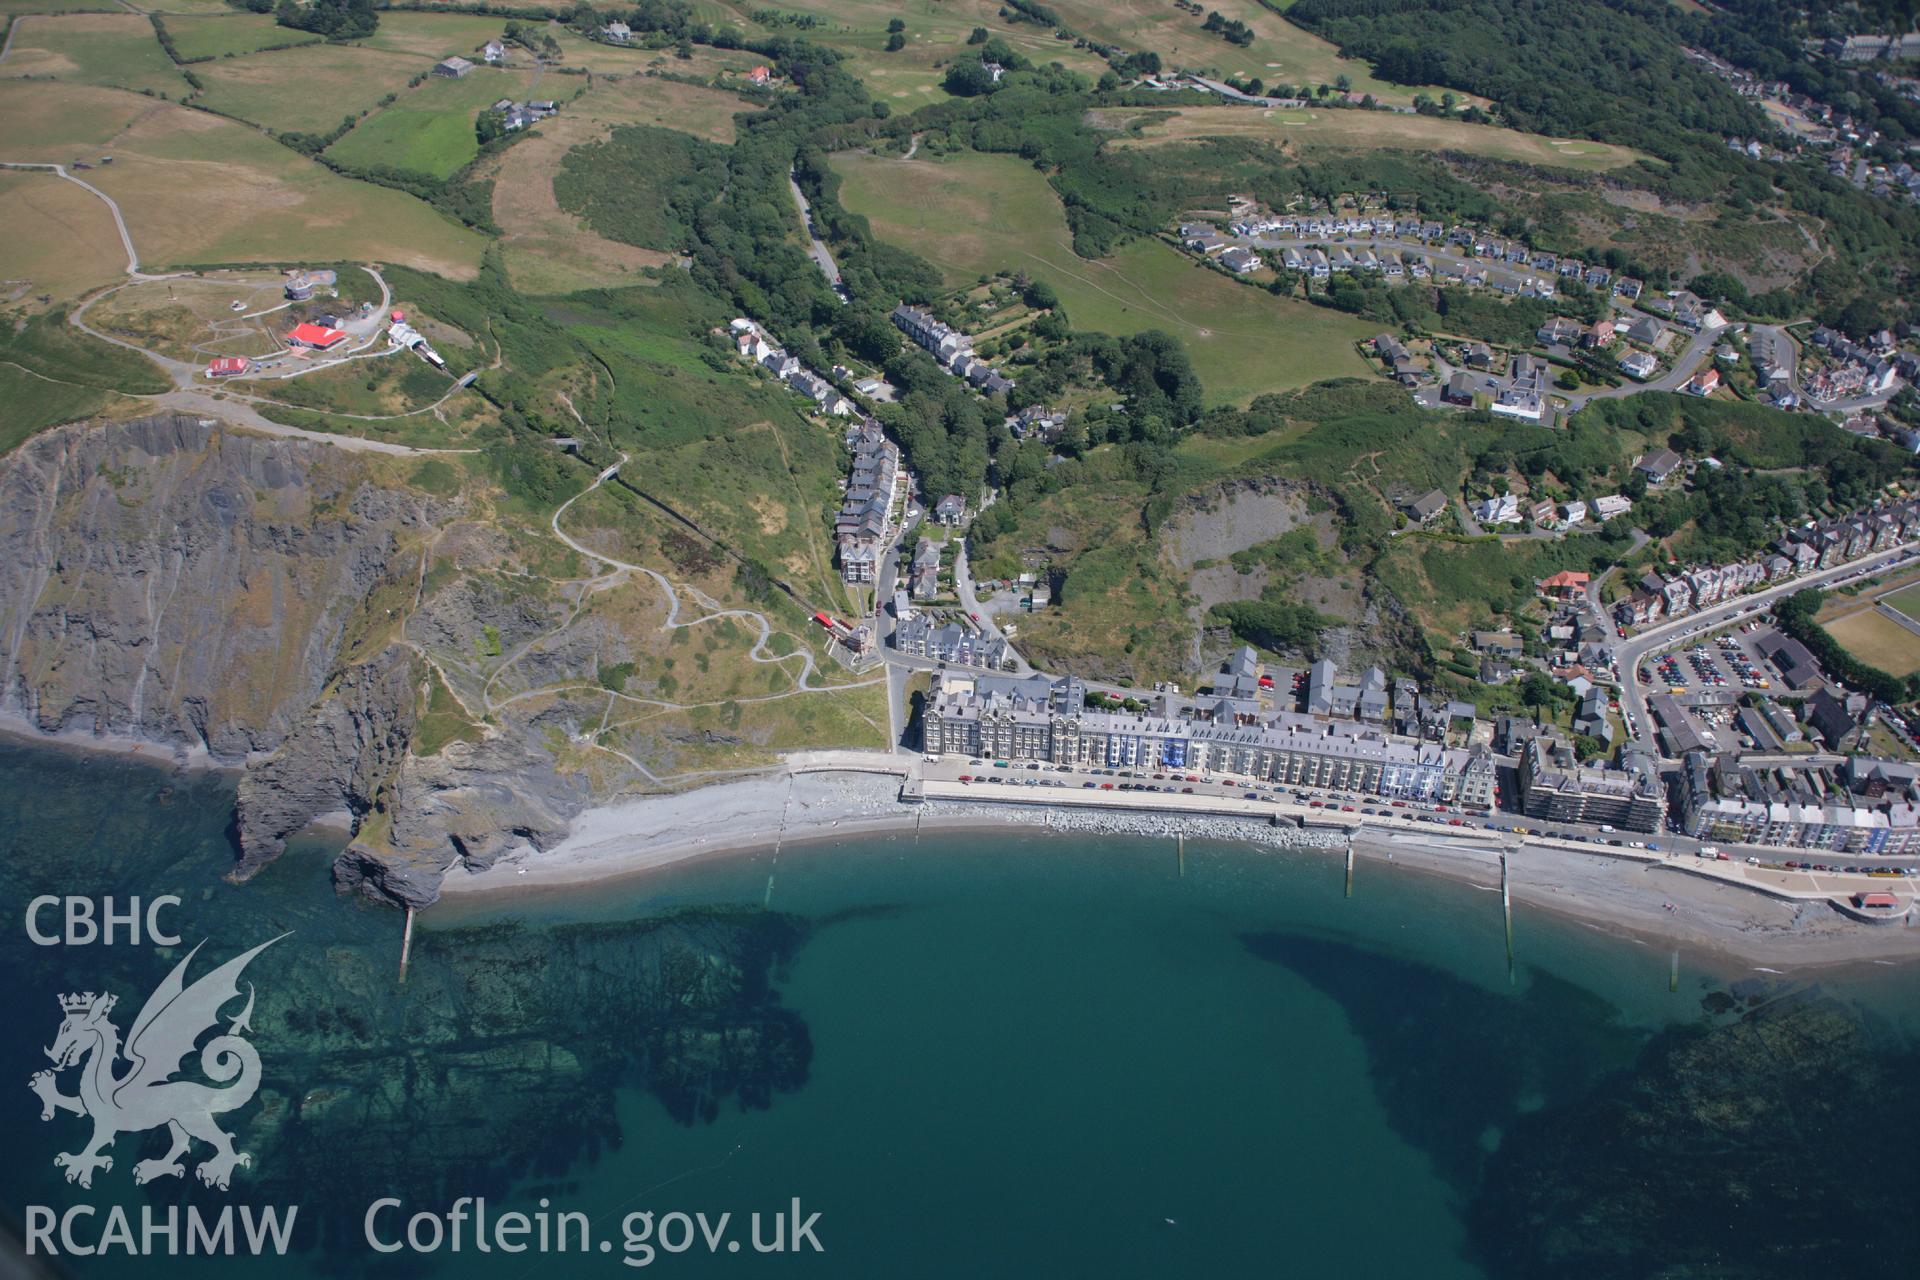 RCAHMW colour oblique aerial photograph of Aberystwyth. Taken on 17 July 2006 by Toby Driver.